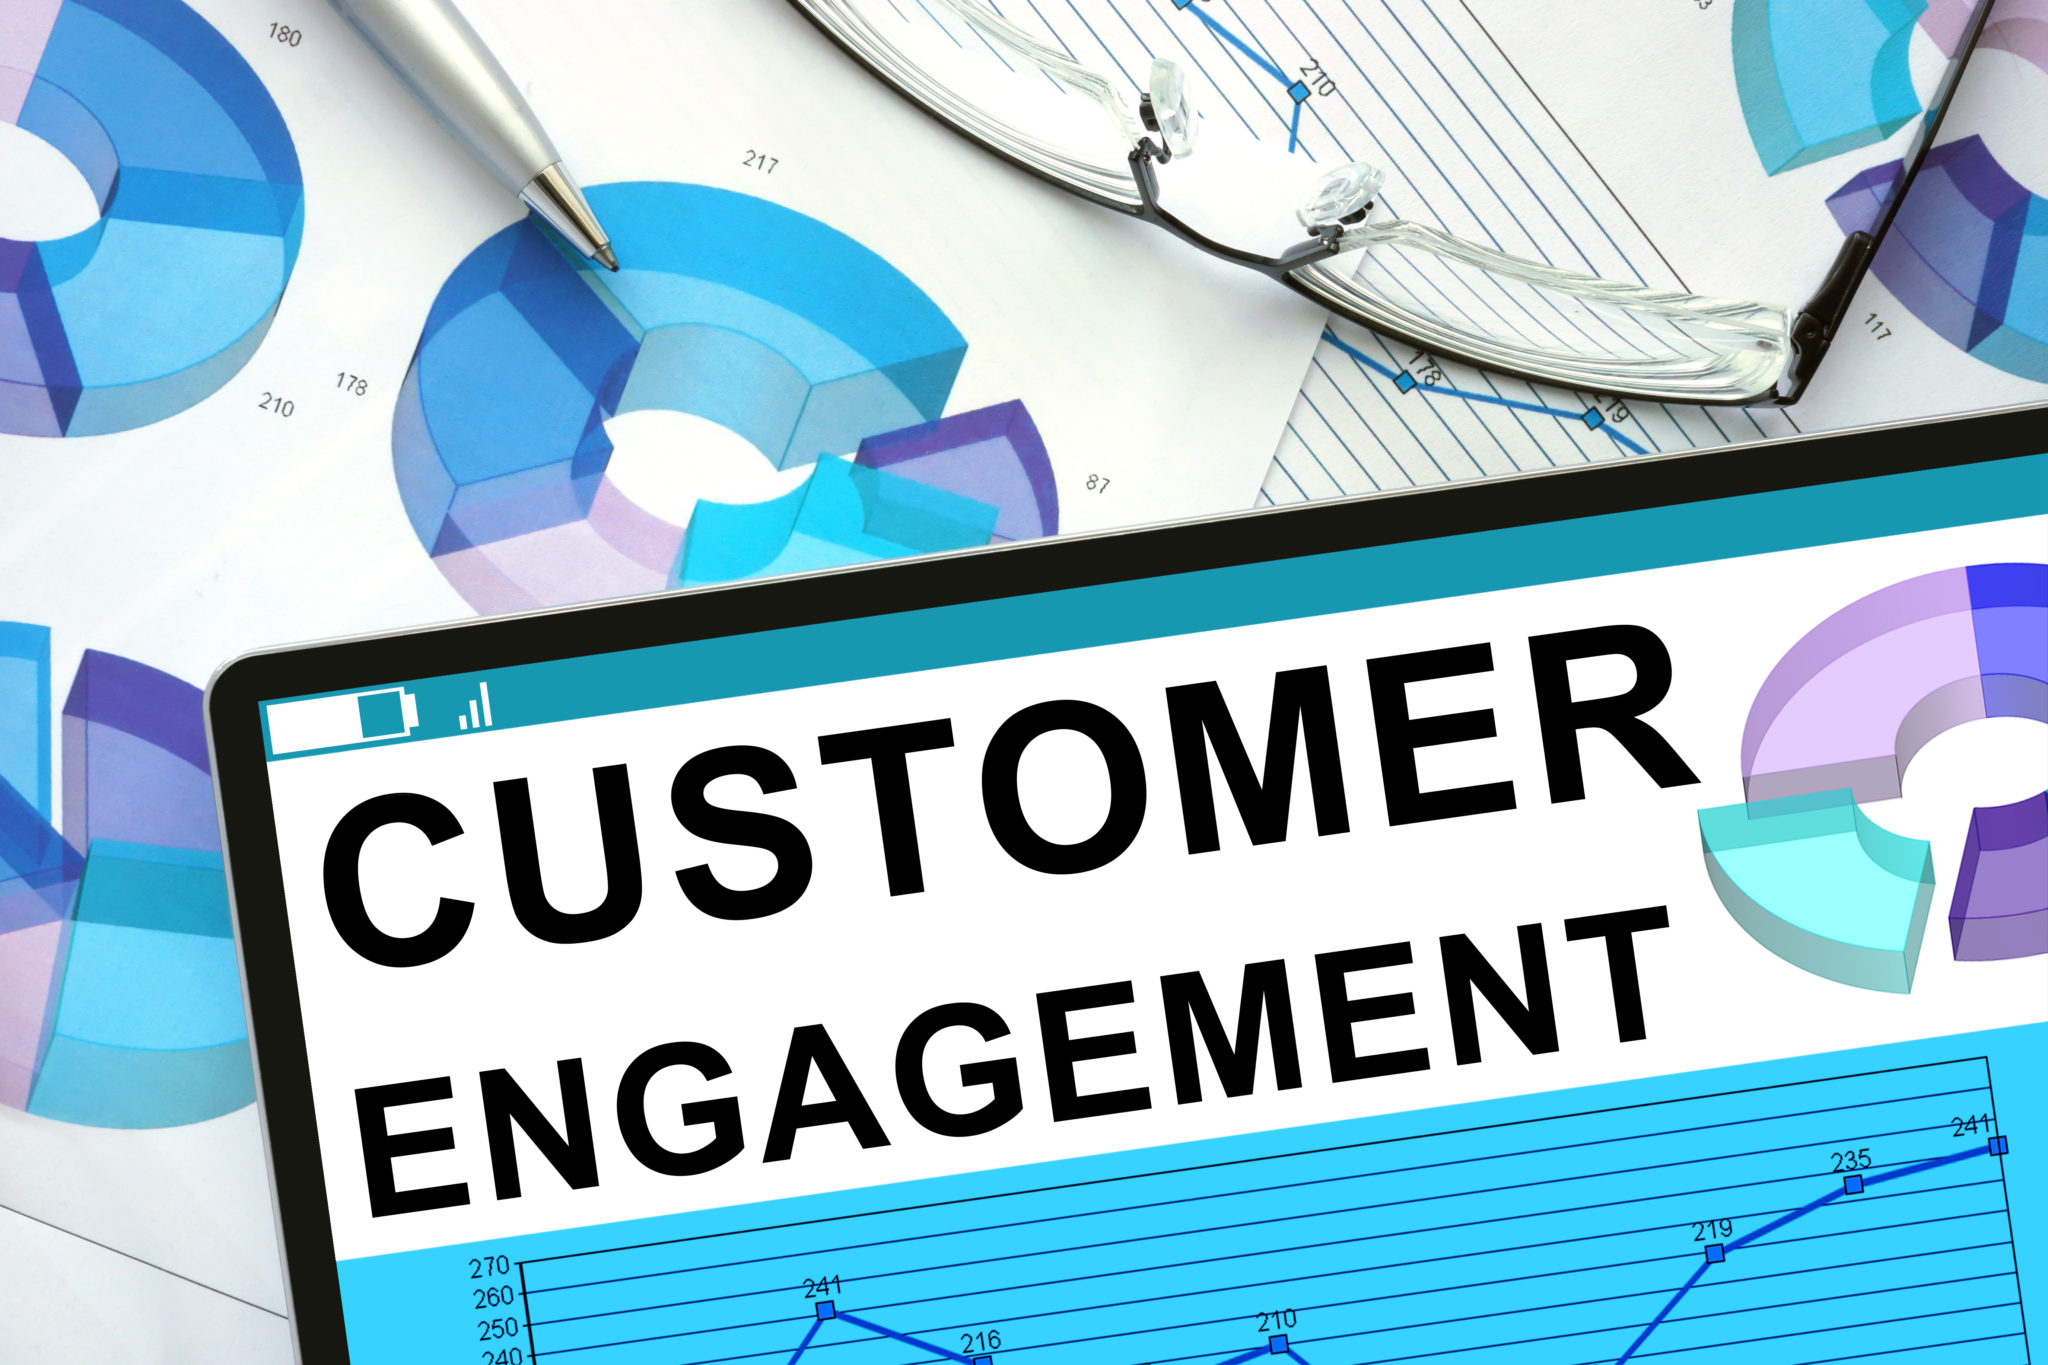 How to Build a Better Customer Engagement Strategy